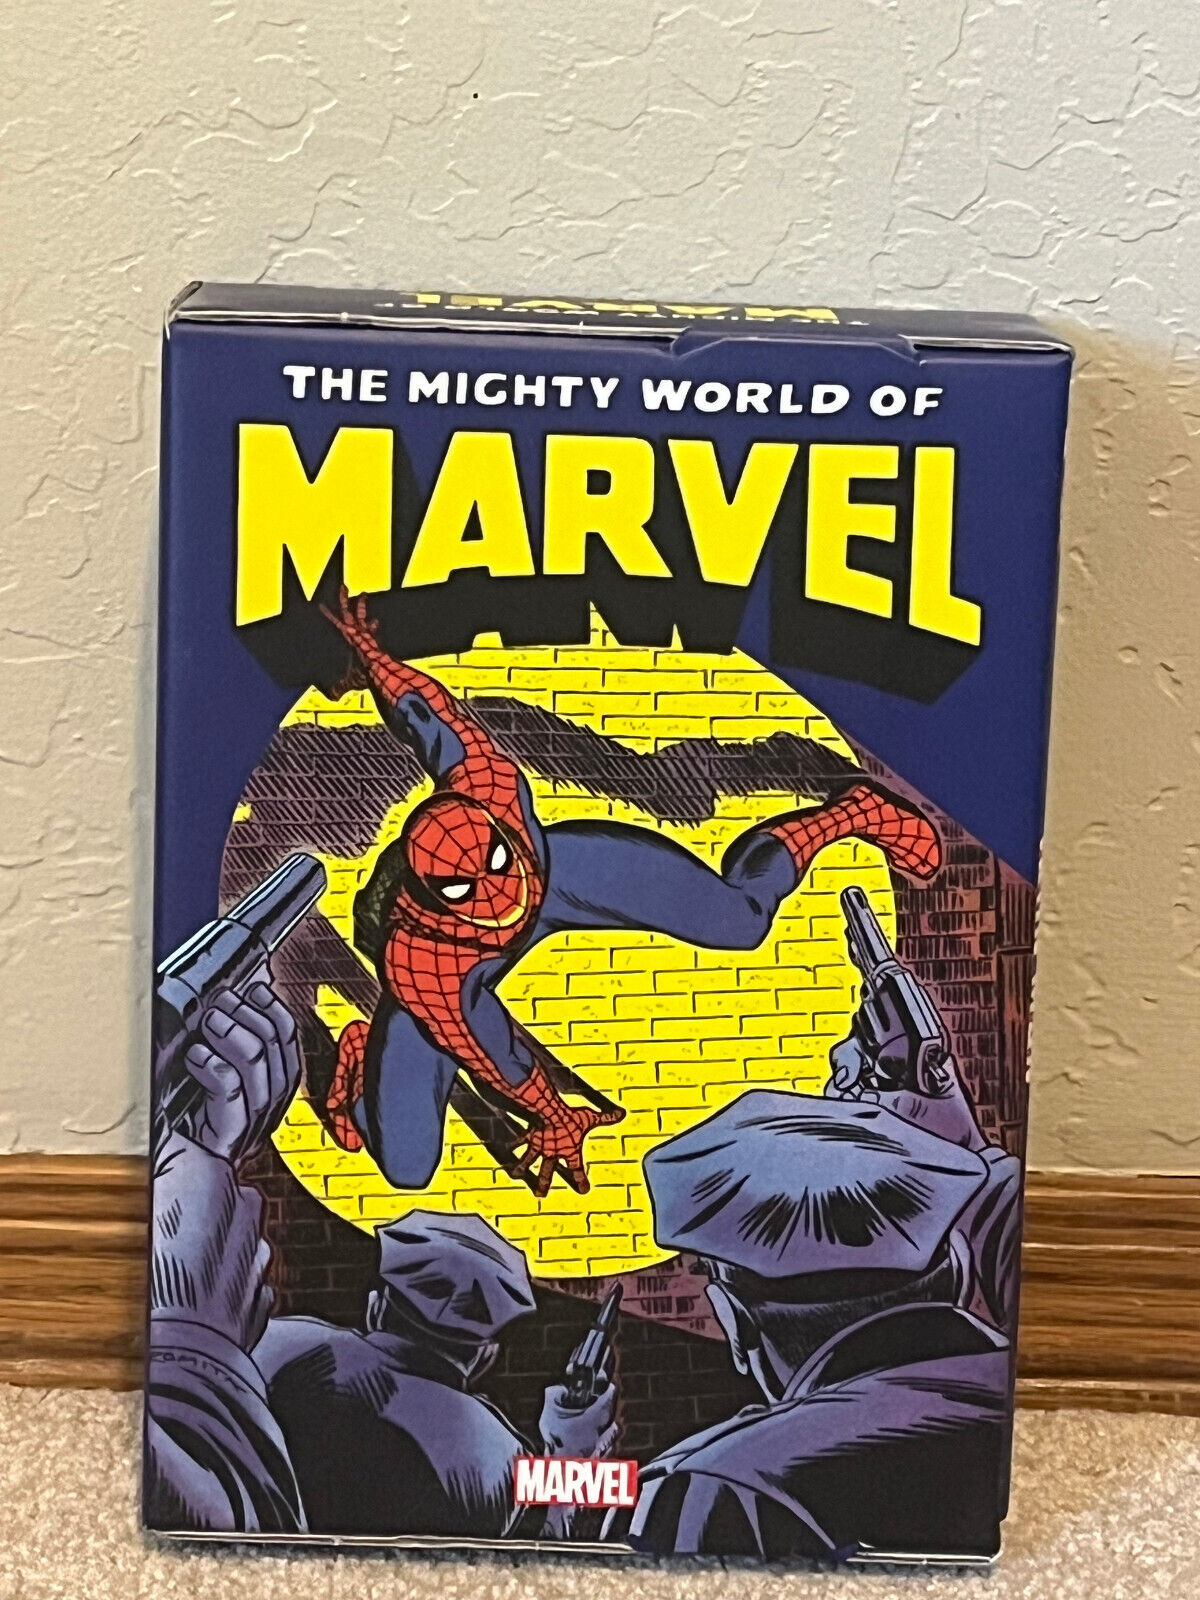 The Mighty World of Marvel - 3 Book Set - Spiderman/Iron Man/Captain America